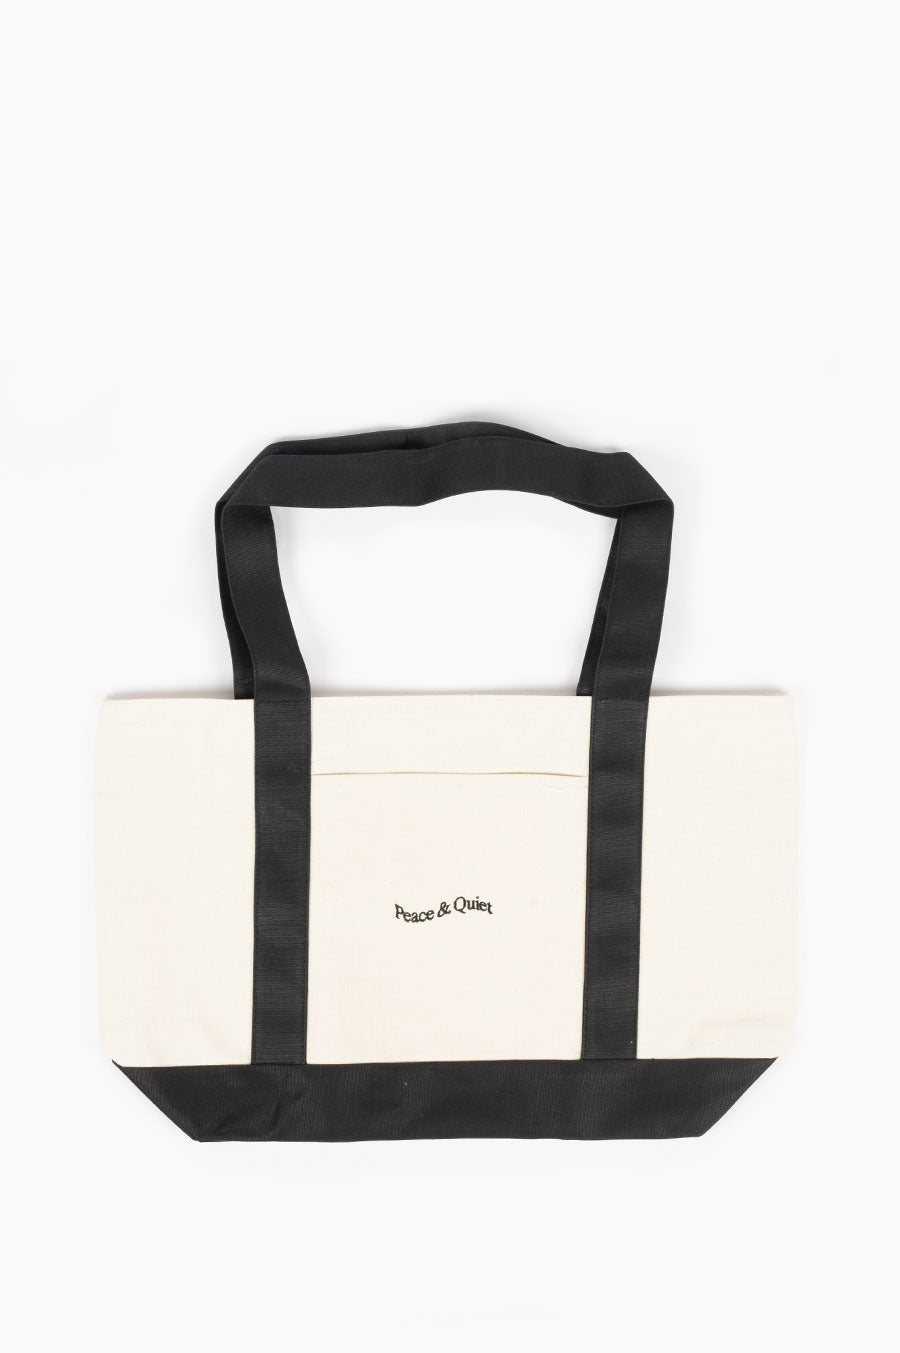 THE MUSEUM OF PEACE AND QUIET WORDMARK TOTE BAG BLACK